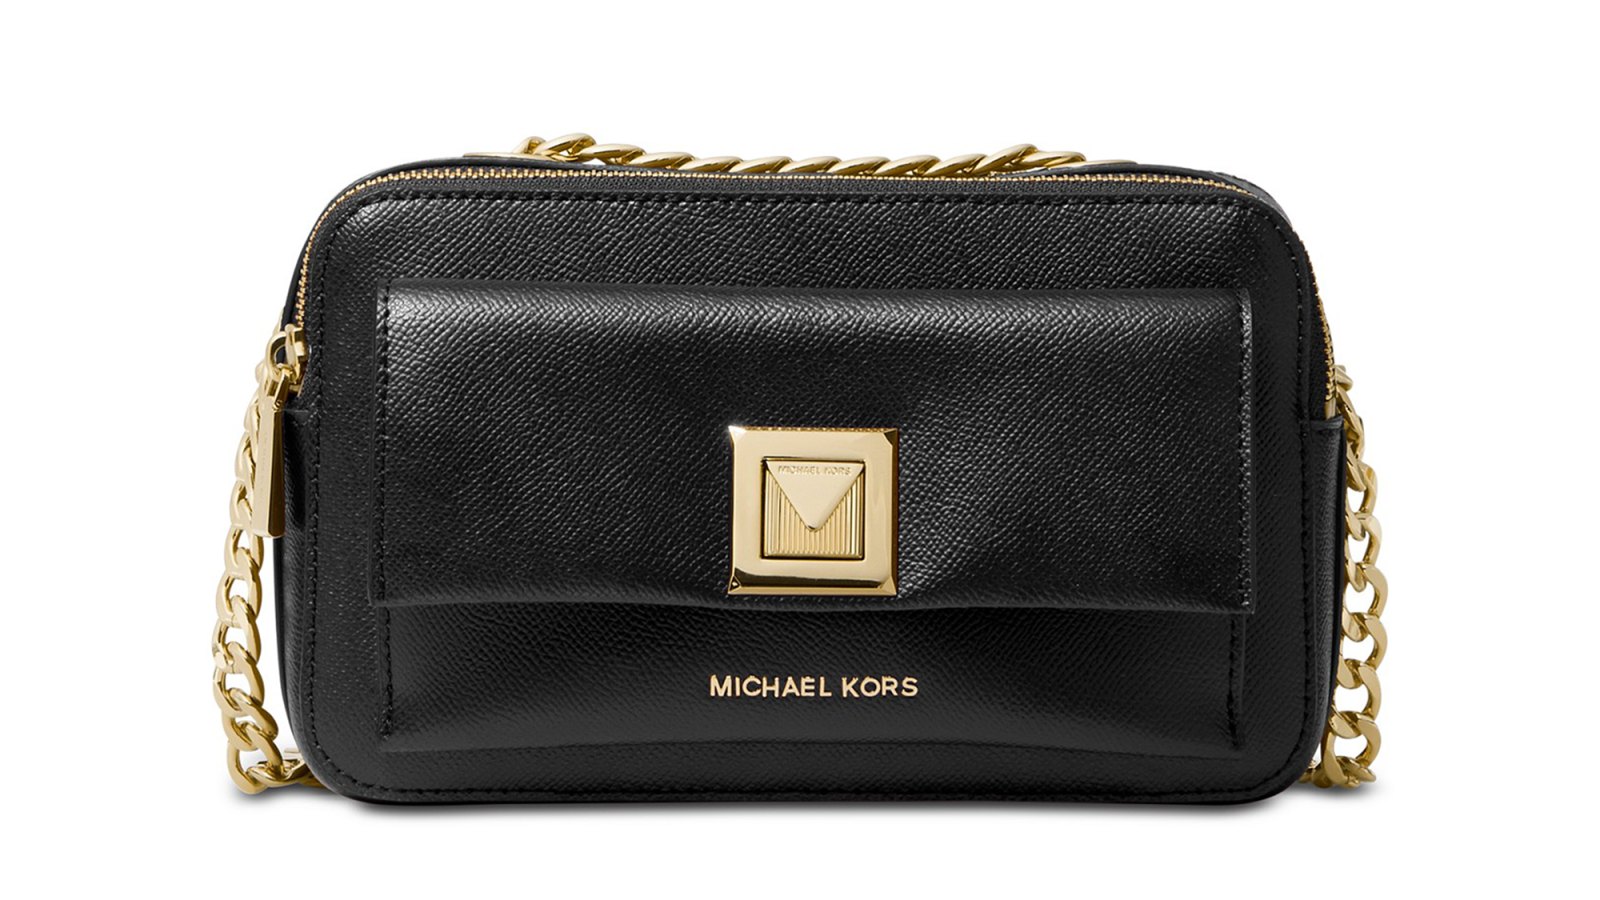 Michael Kors Handbags Are Up to 60% Off at Macy's Right Now